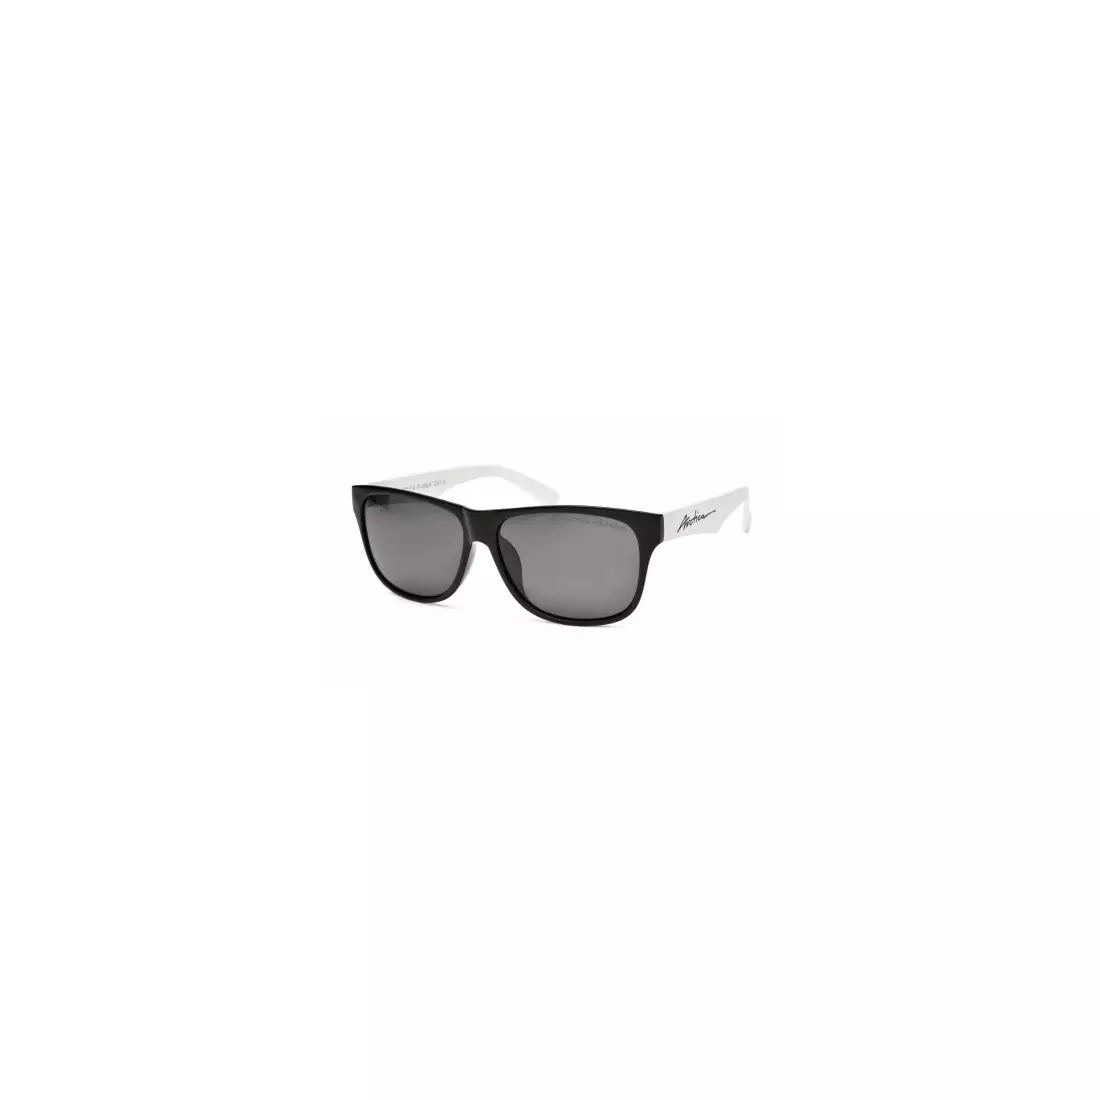 ARCTICA cycling/sports glasses, S 262A